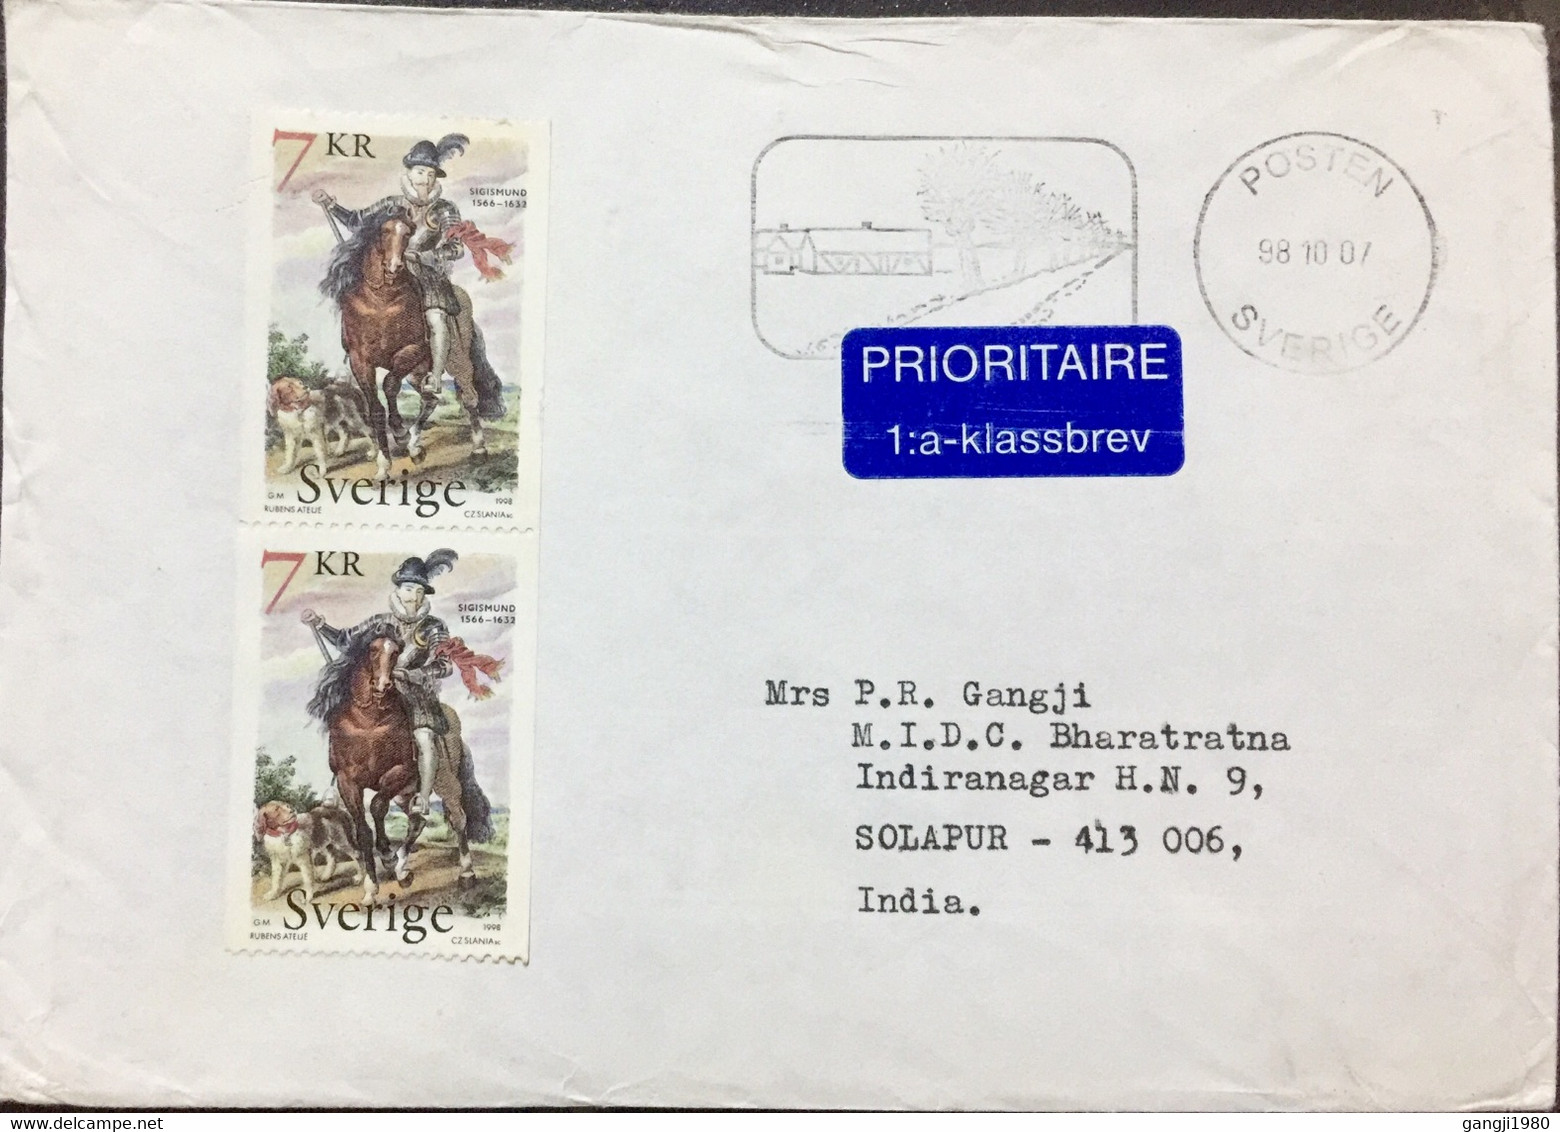 SWEDEN 2007, AIRMAIL COVER USED TO INDIA,POSTEN PICTURAL SLOGAN,CANCELLATION!!! SIGISMUND 1998 STAMPS PAIR - Briefe U. Dokumente